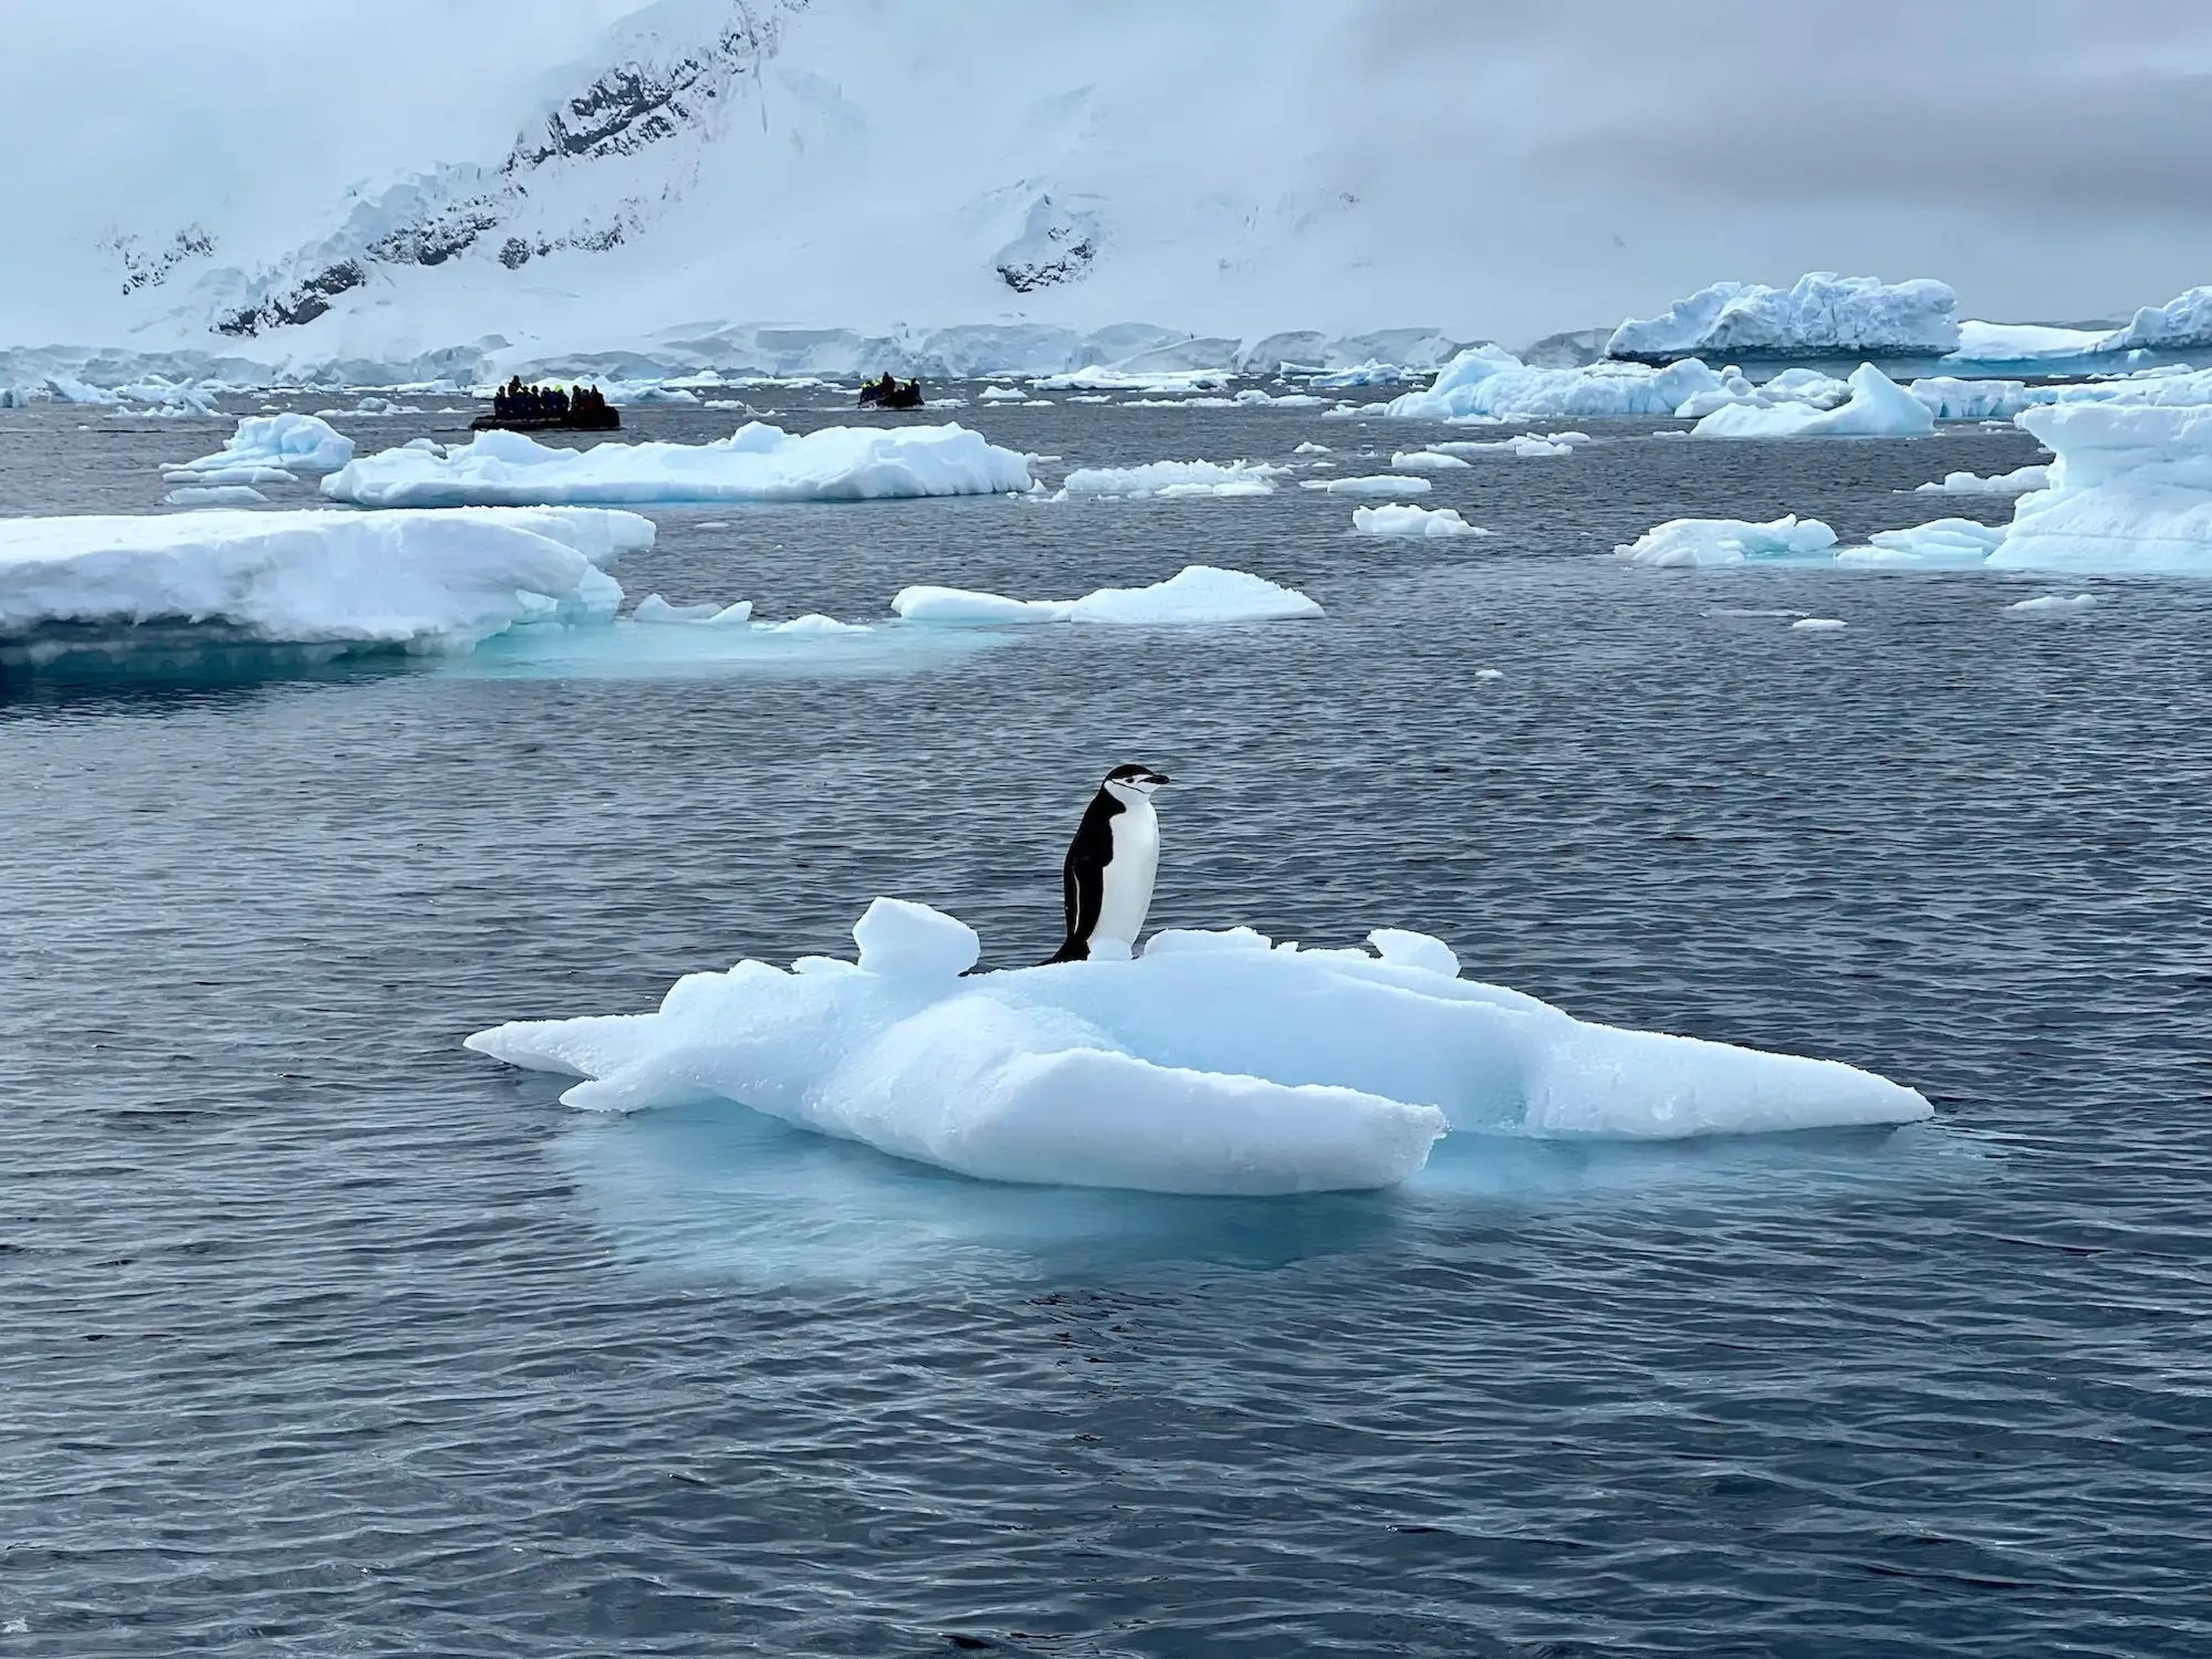 A chinstrap penguin on a small iceberg.